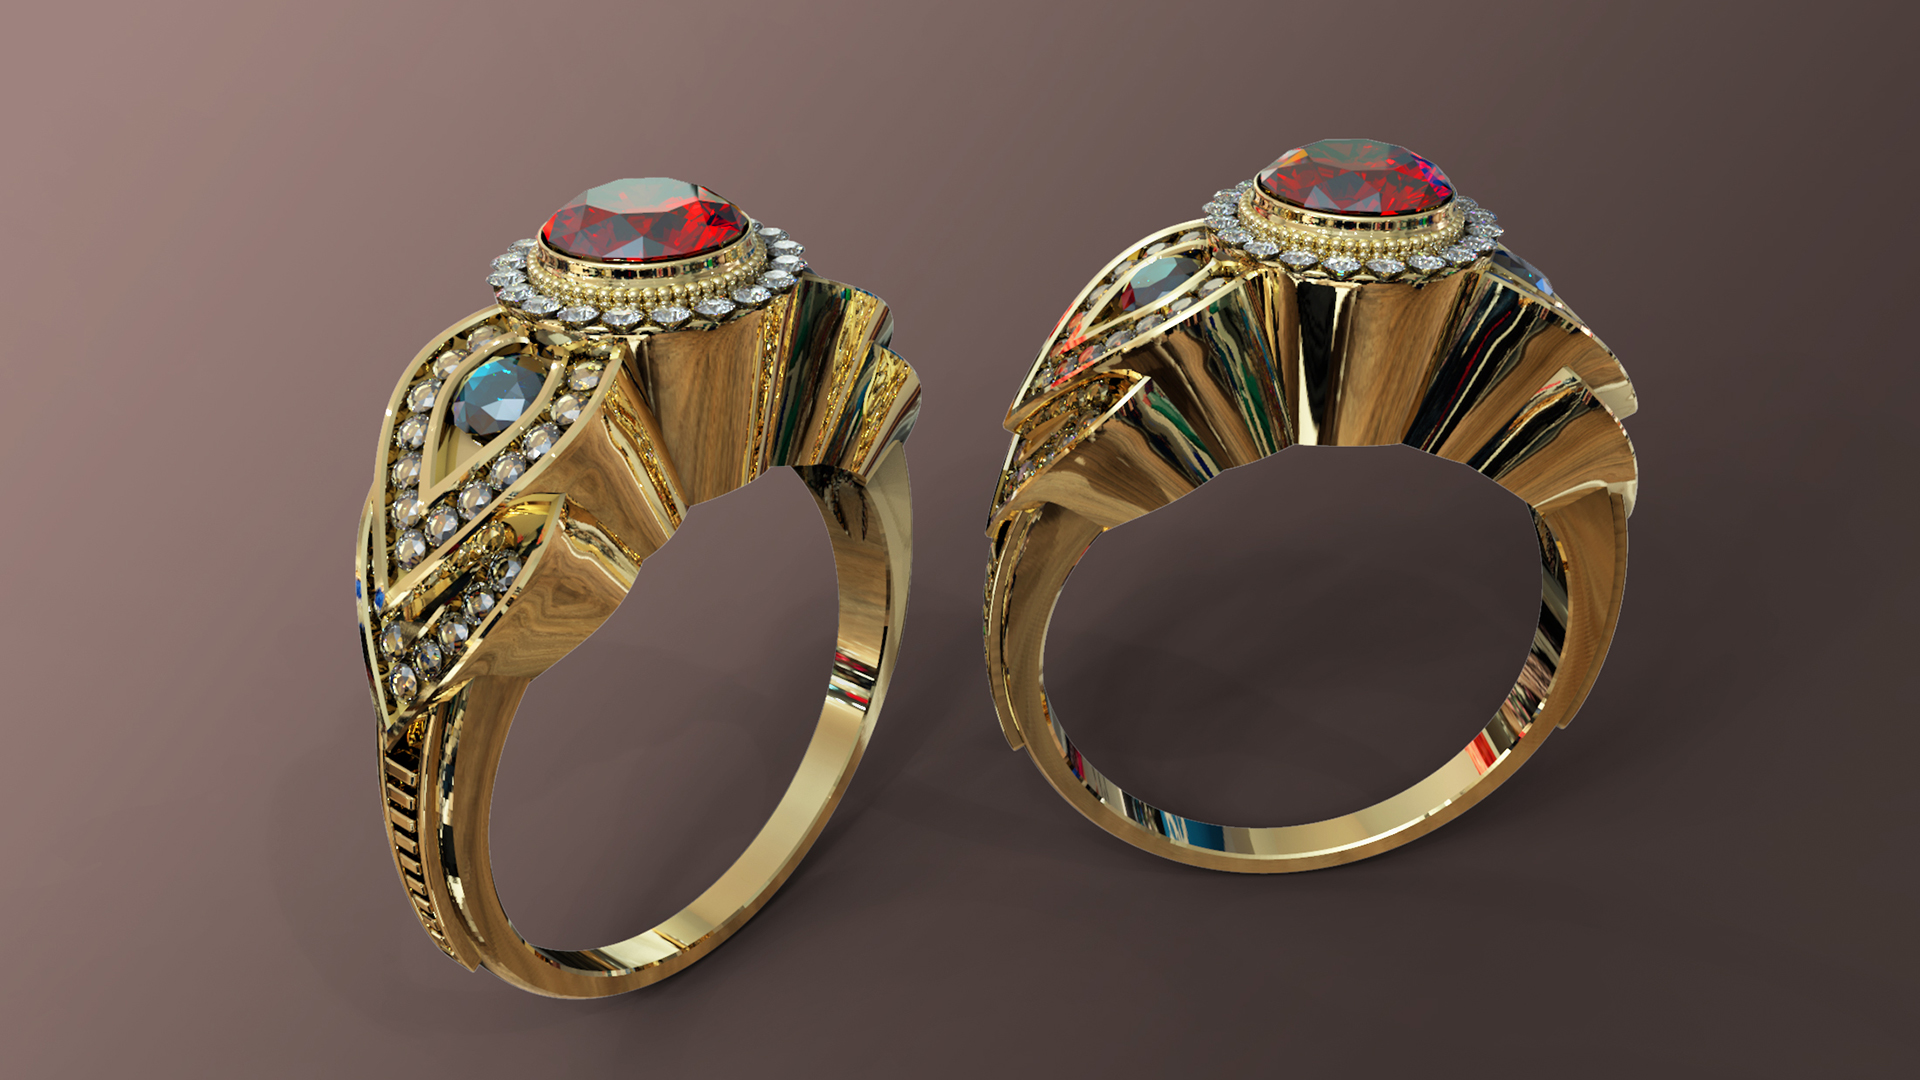 jewlwry design on zbrush online course